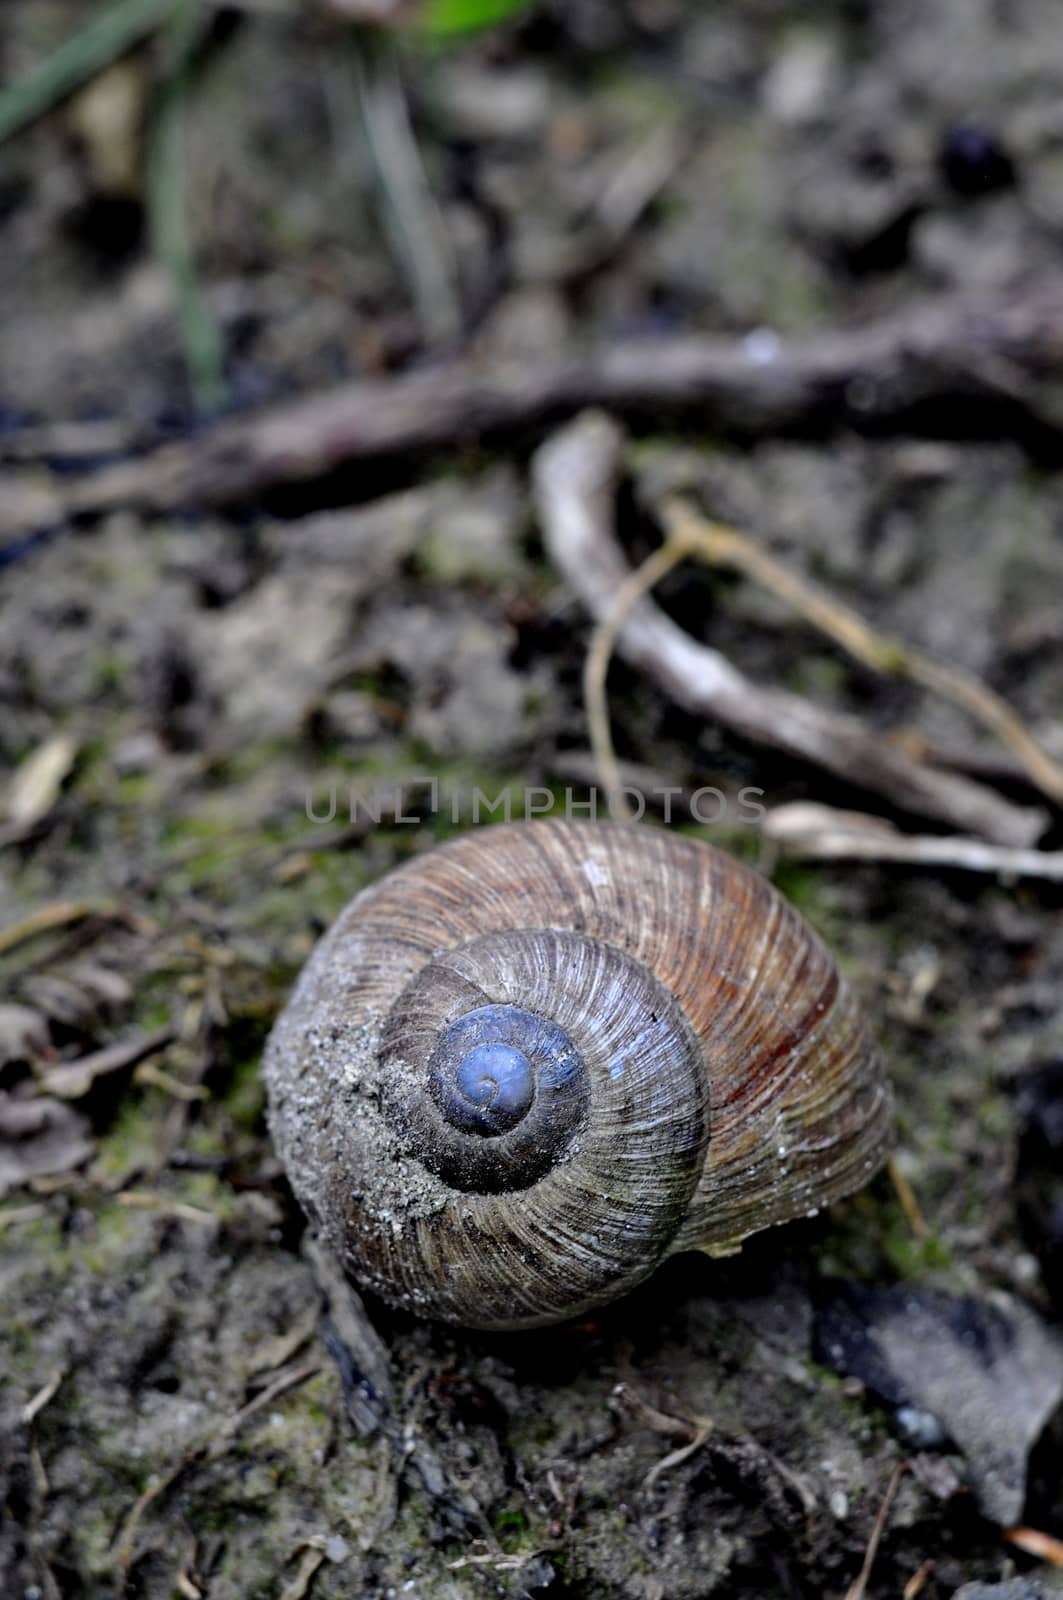 Snail in the forrest by anderm